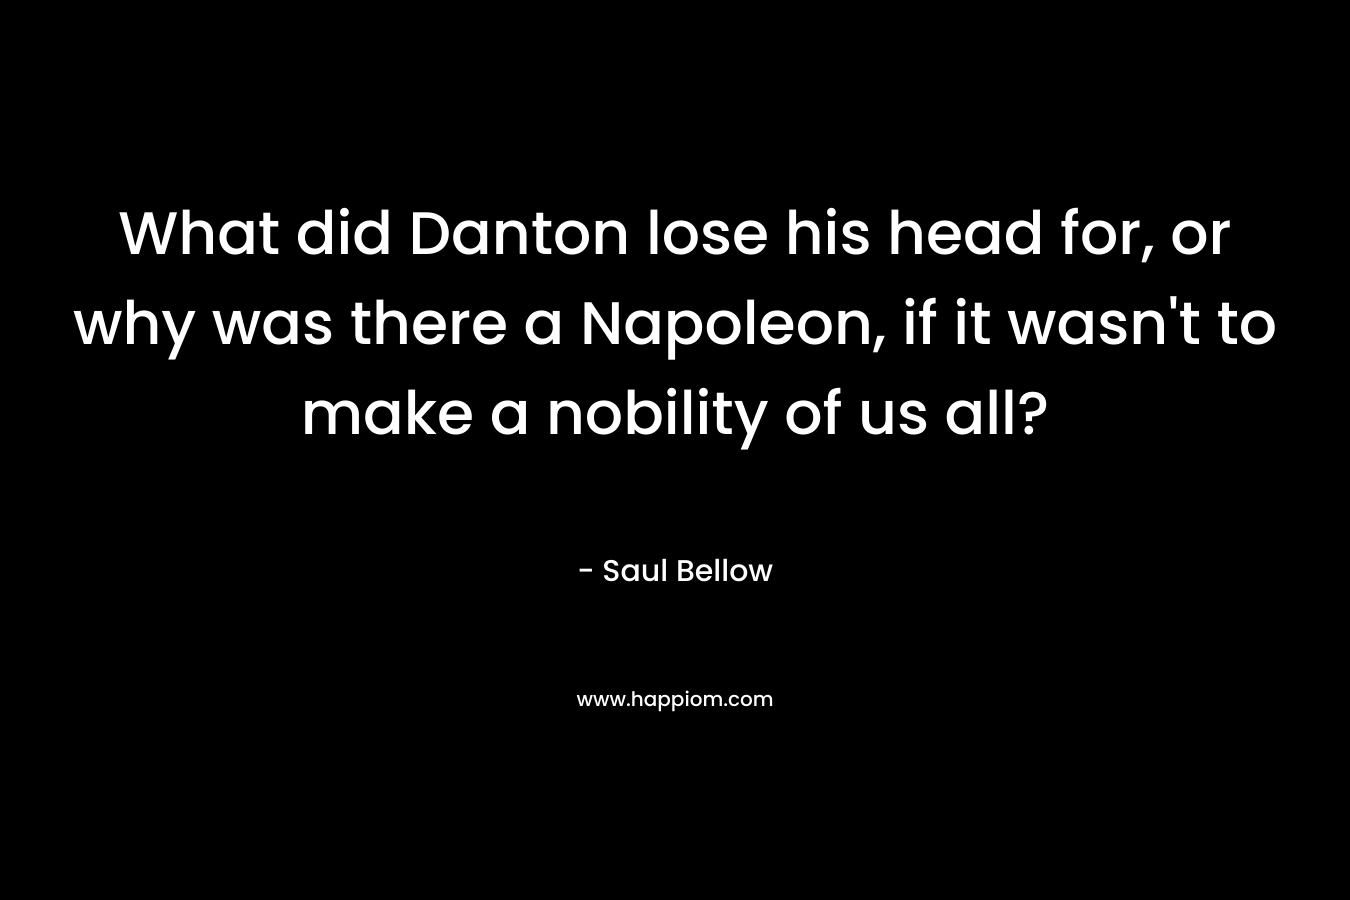 What did Danton lose his head for, or why was there a Napoleon, if it wasn't to make a nobility of us all?